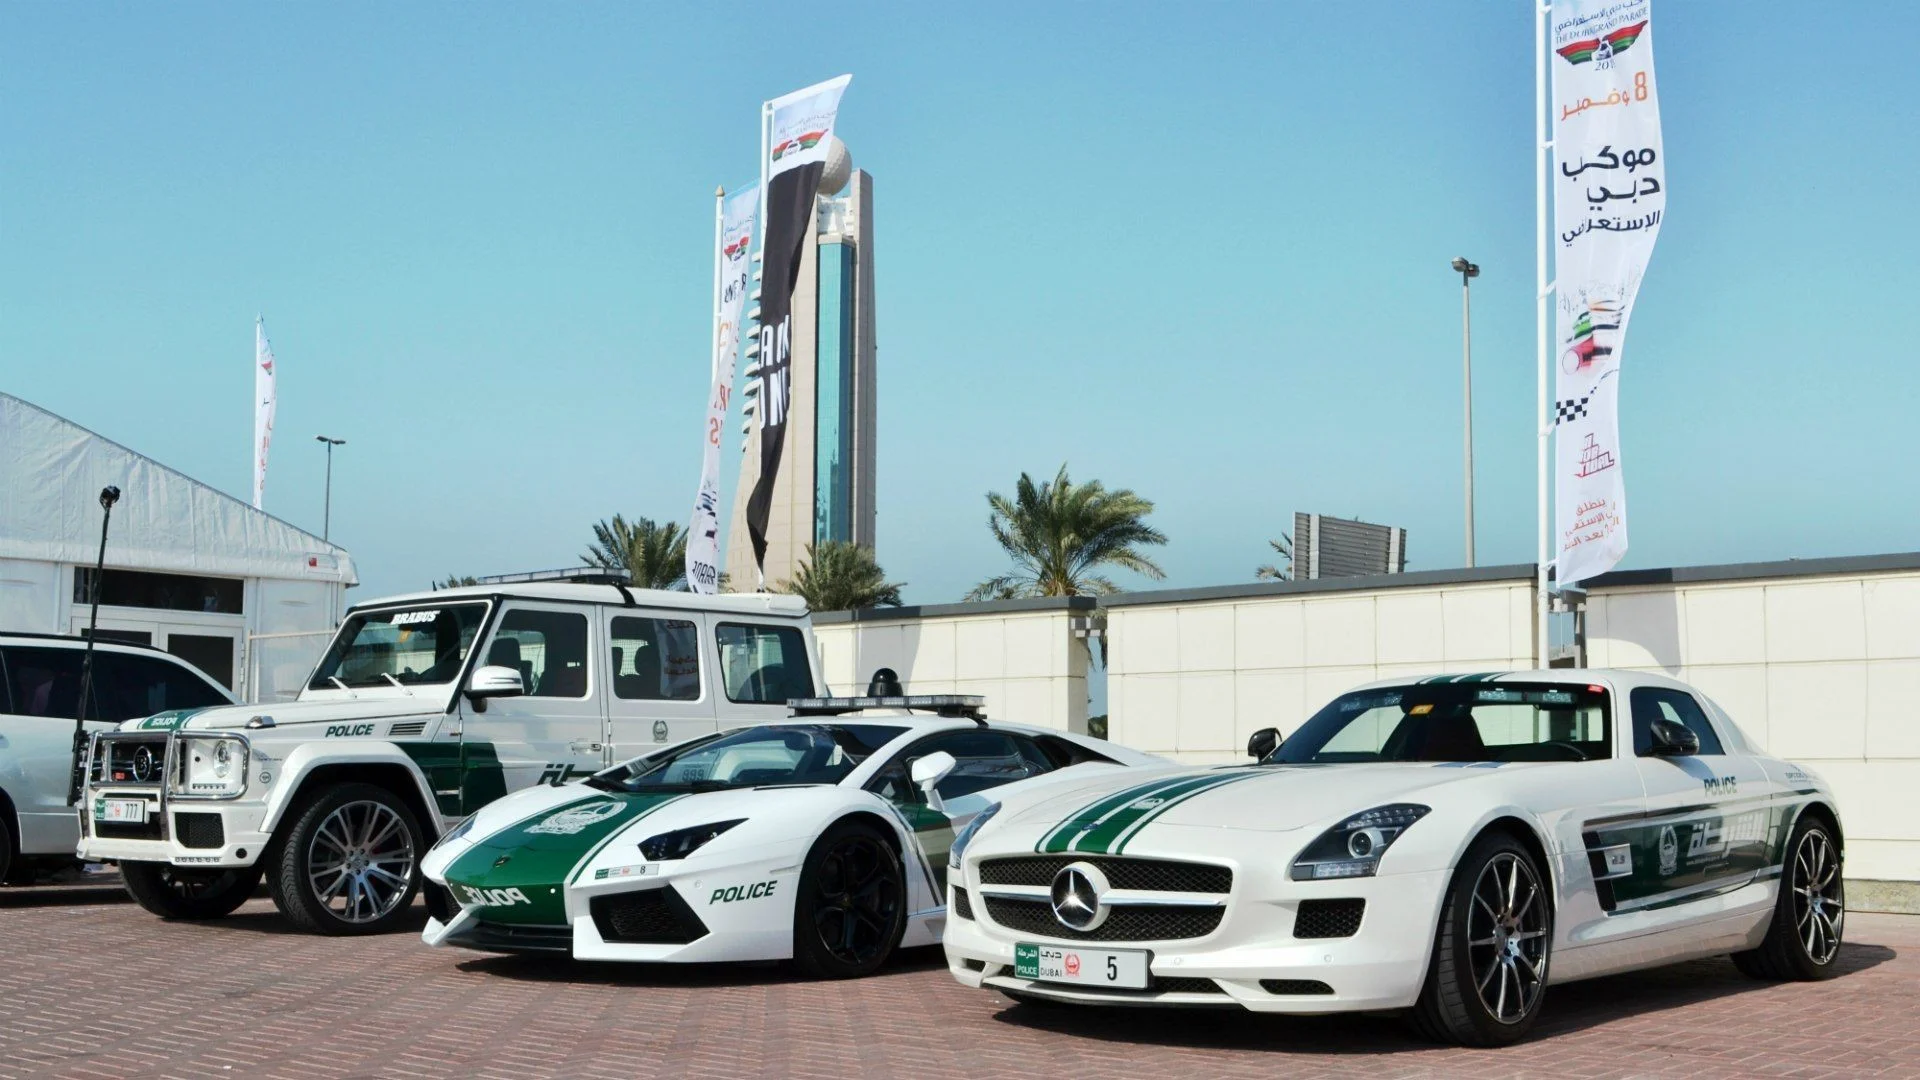 Dubai Police Cars wallpapers and images – wallpapers, pictures, photos